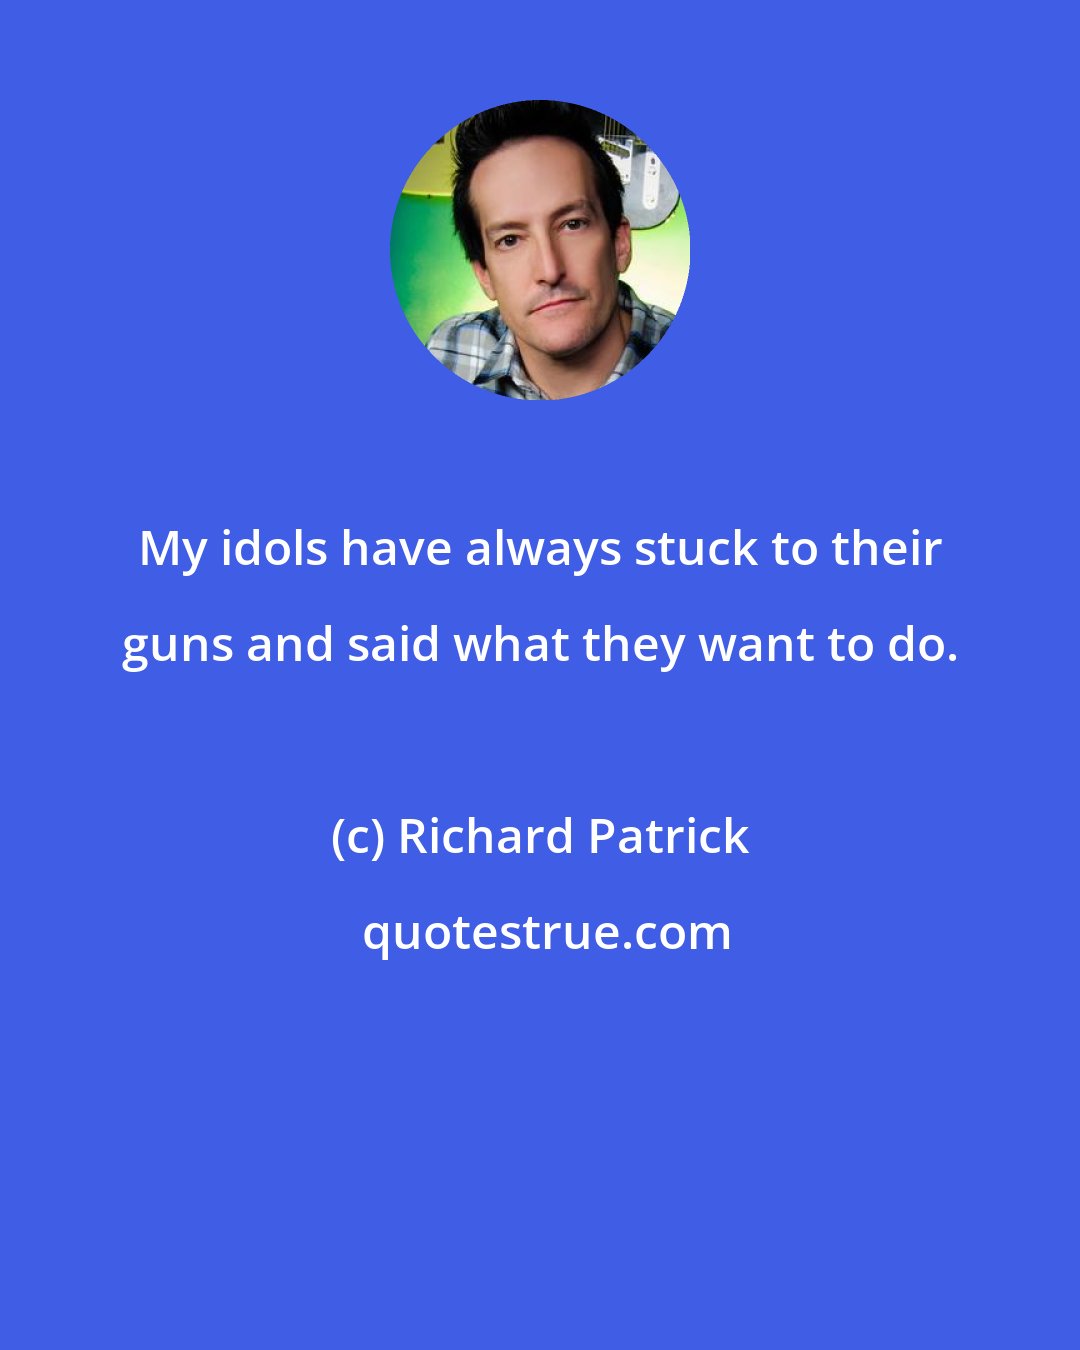 Richard Patrick: My idols have always stuck to their guns and said what they want to do.